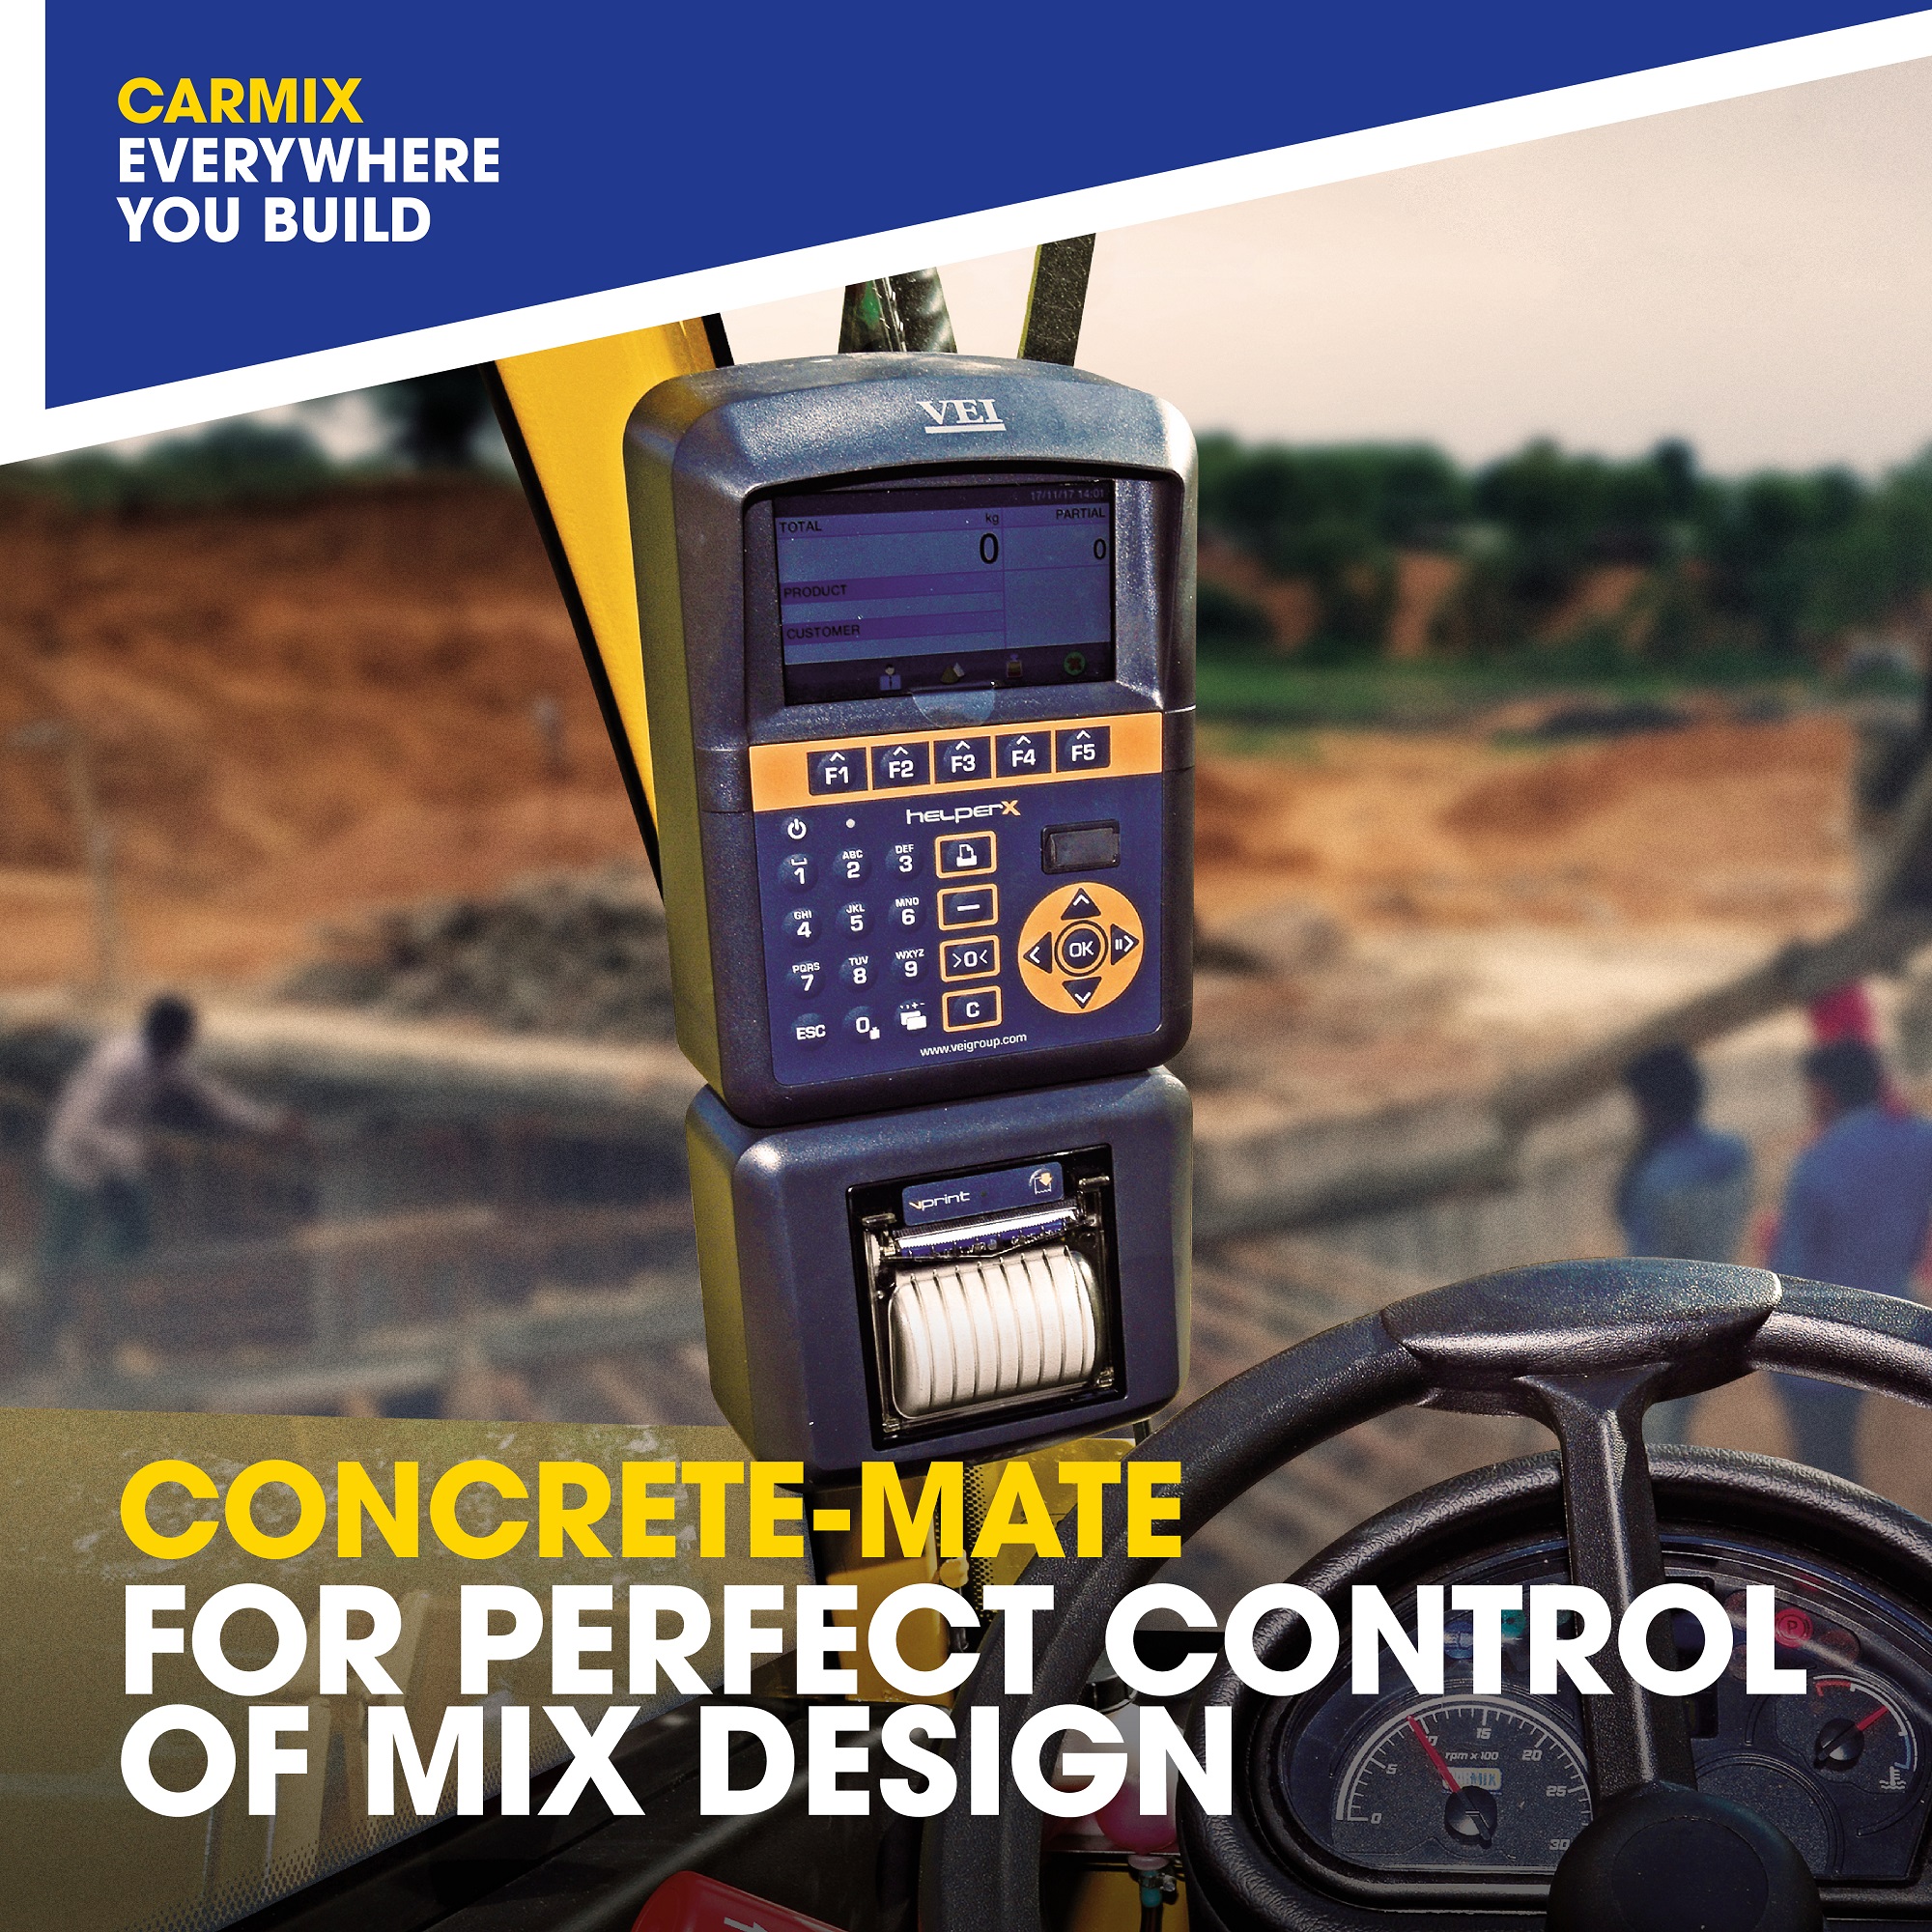 Concrete-Mate, the electronic weighing system by Carmix